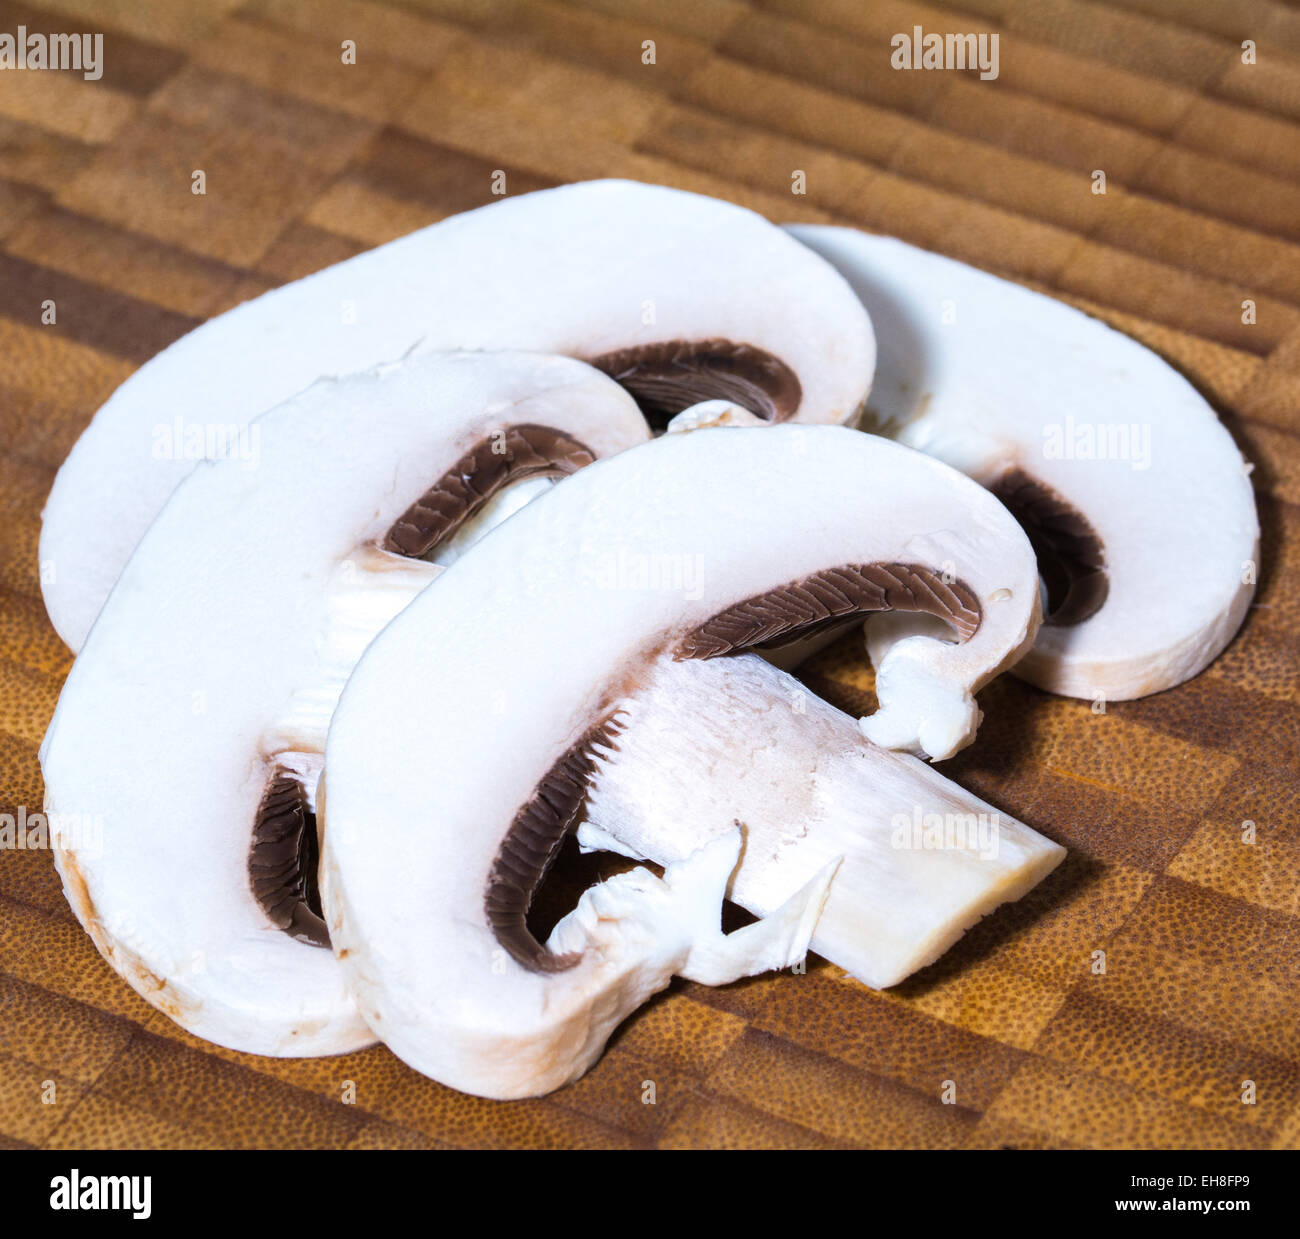 Sliced mushrooms on a cooking board Stock Photo